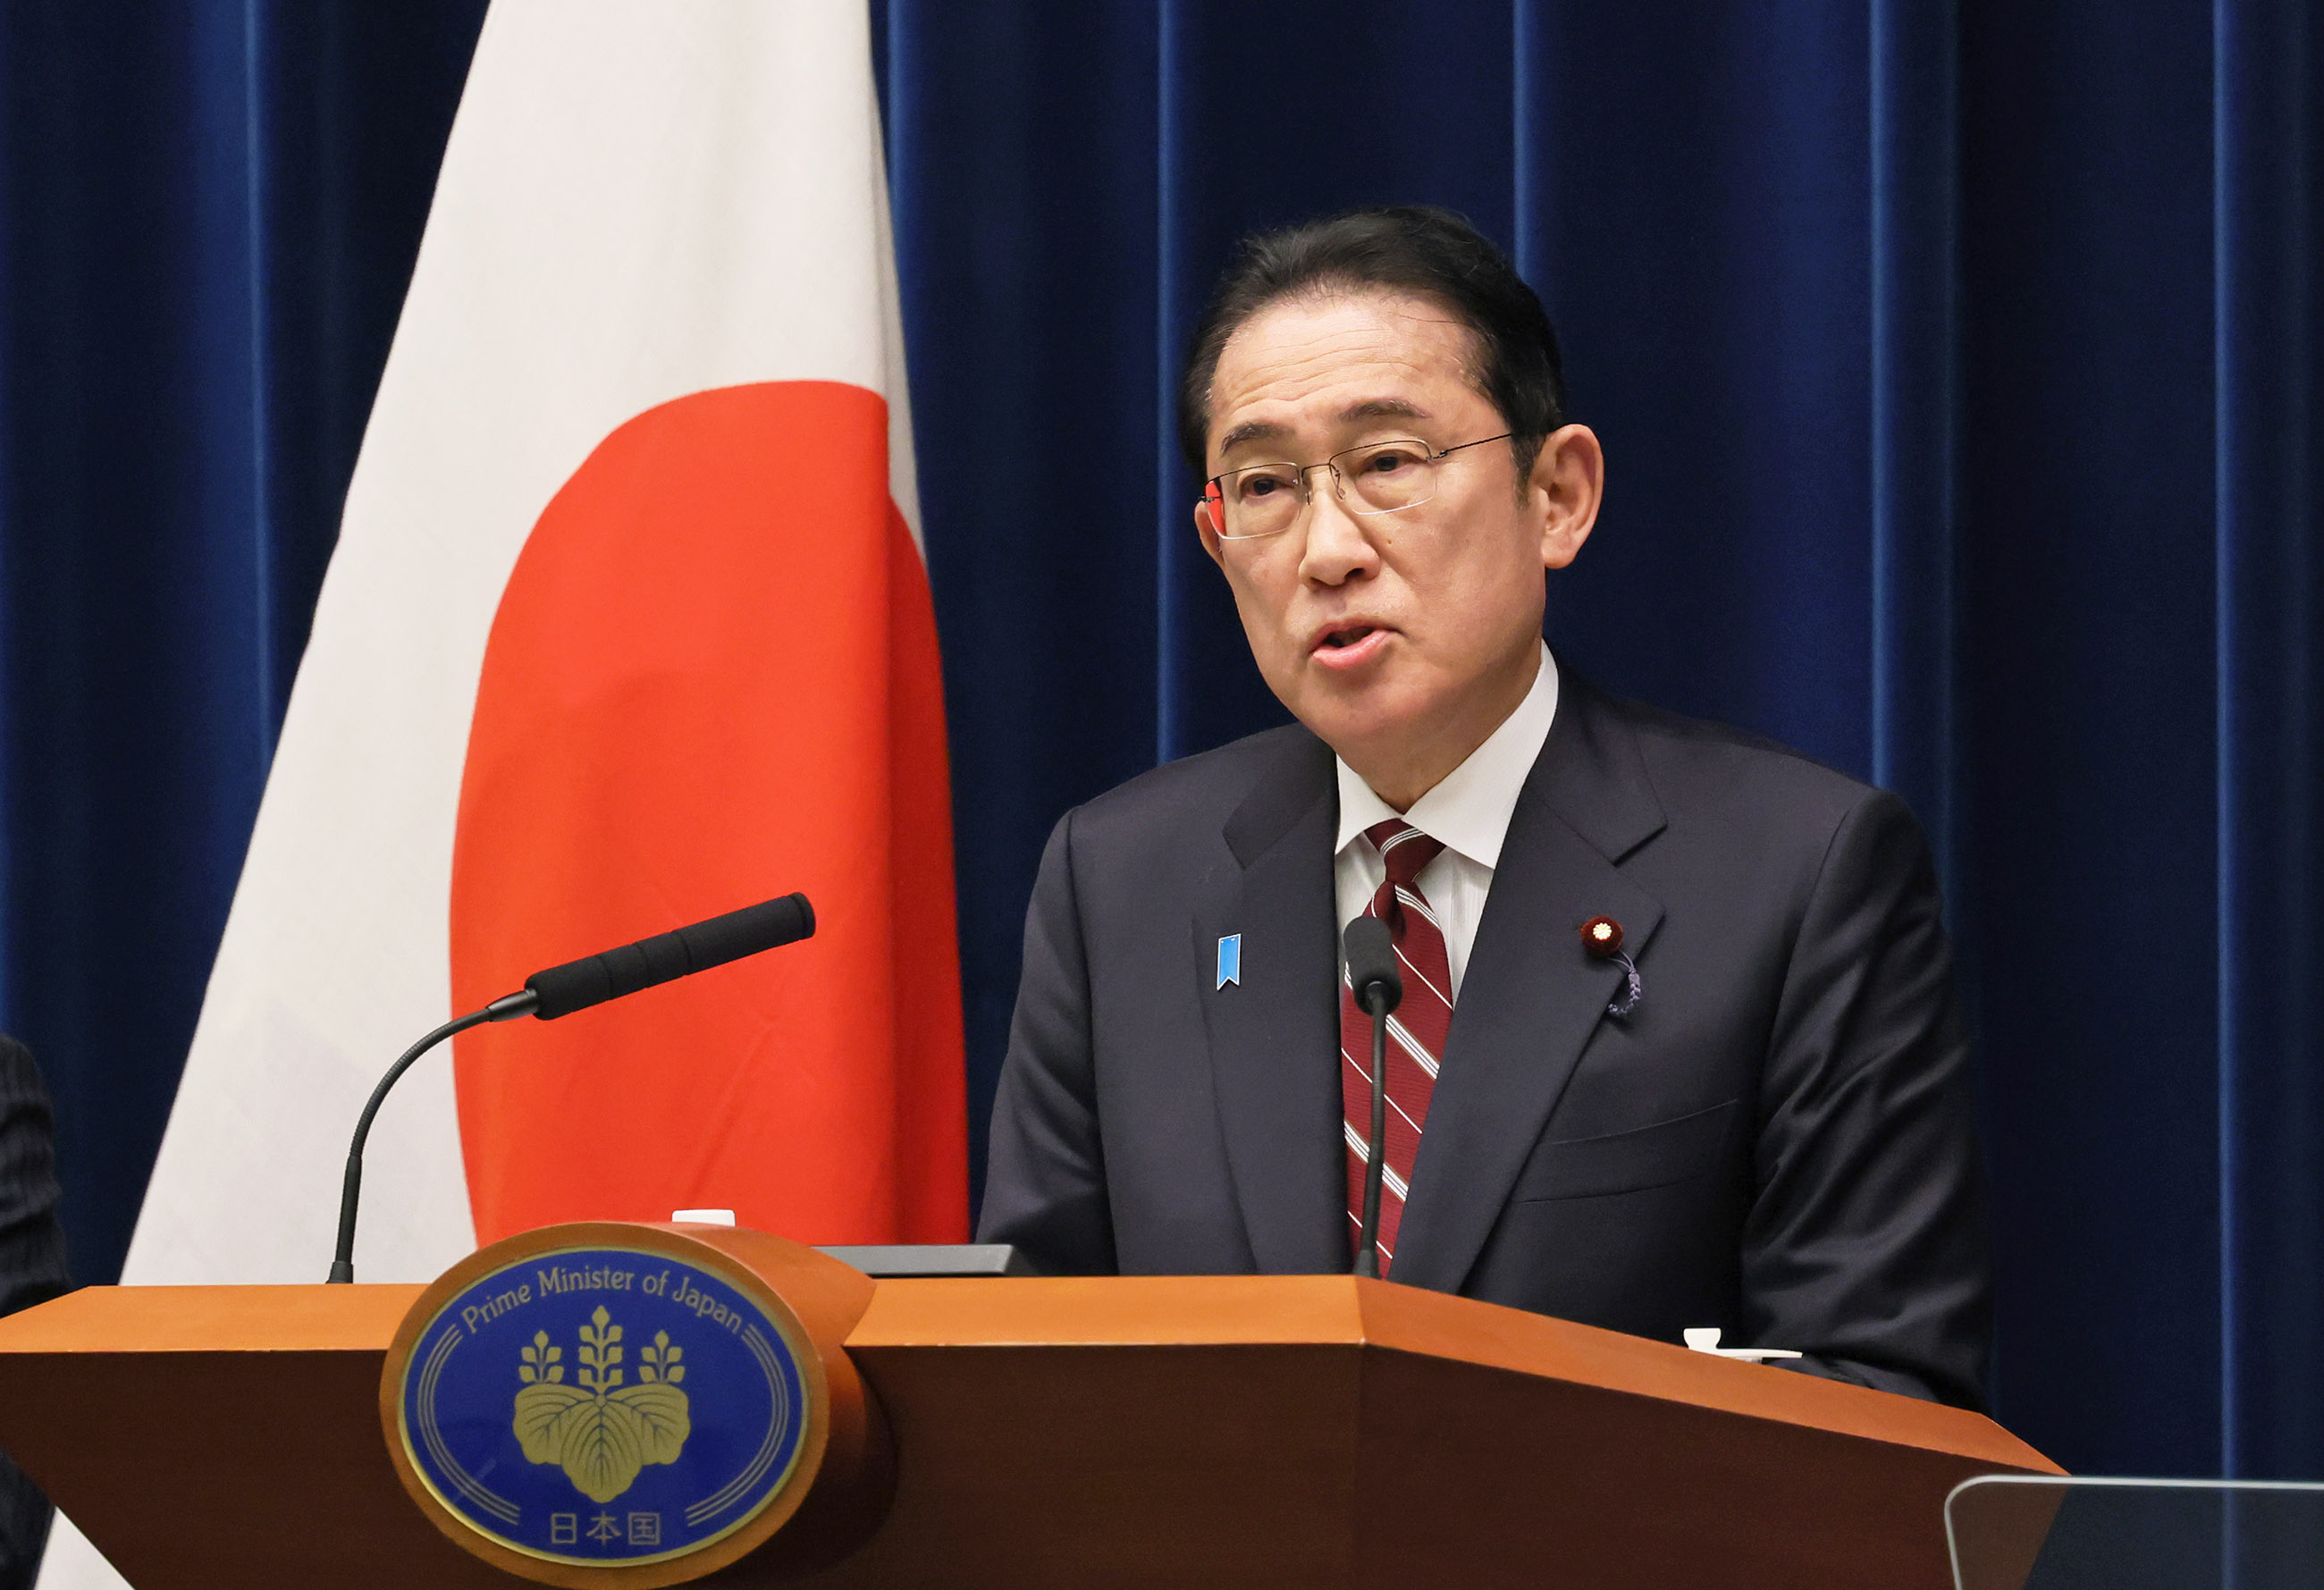 Prime Minister Kishida answering questions from the journalists (3